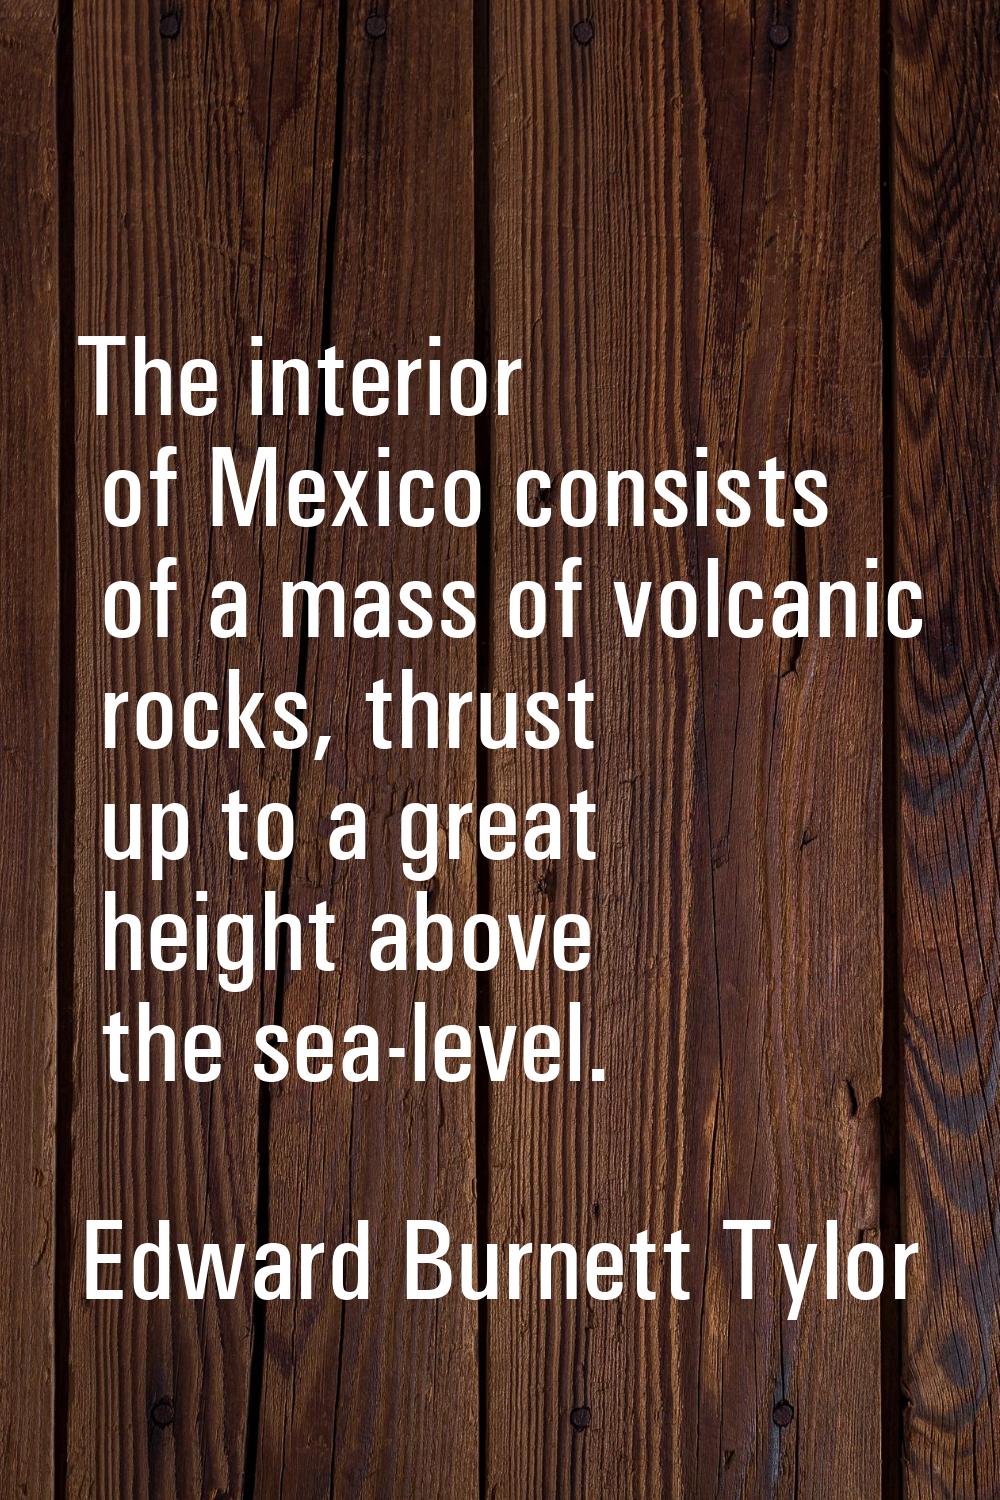 The interior of Mexico consists of a mass of volcanic rocks, thrust up to a great height above the 